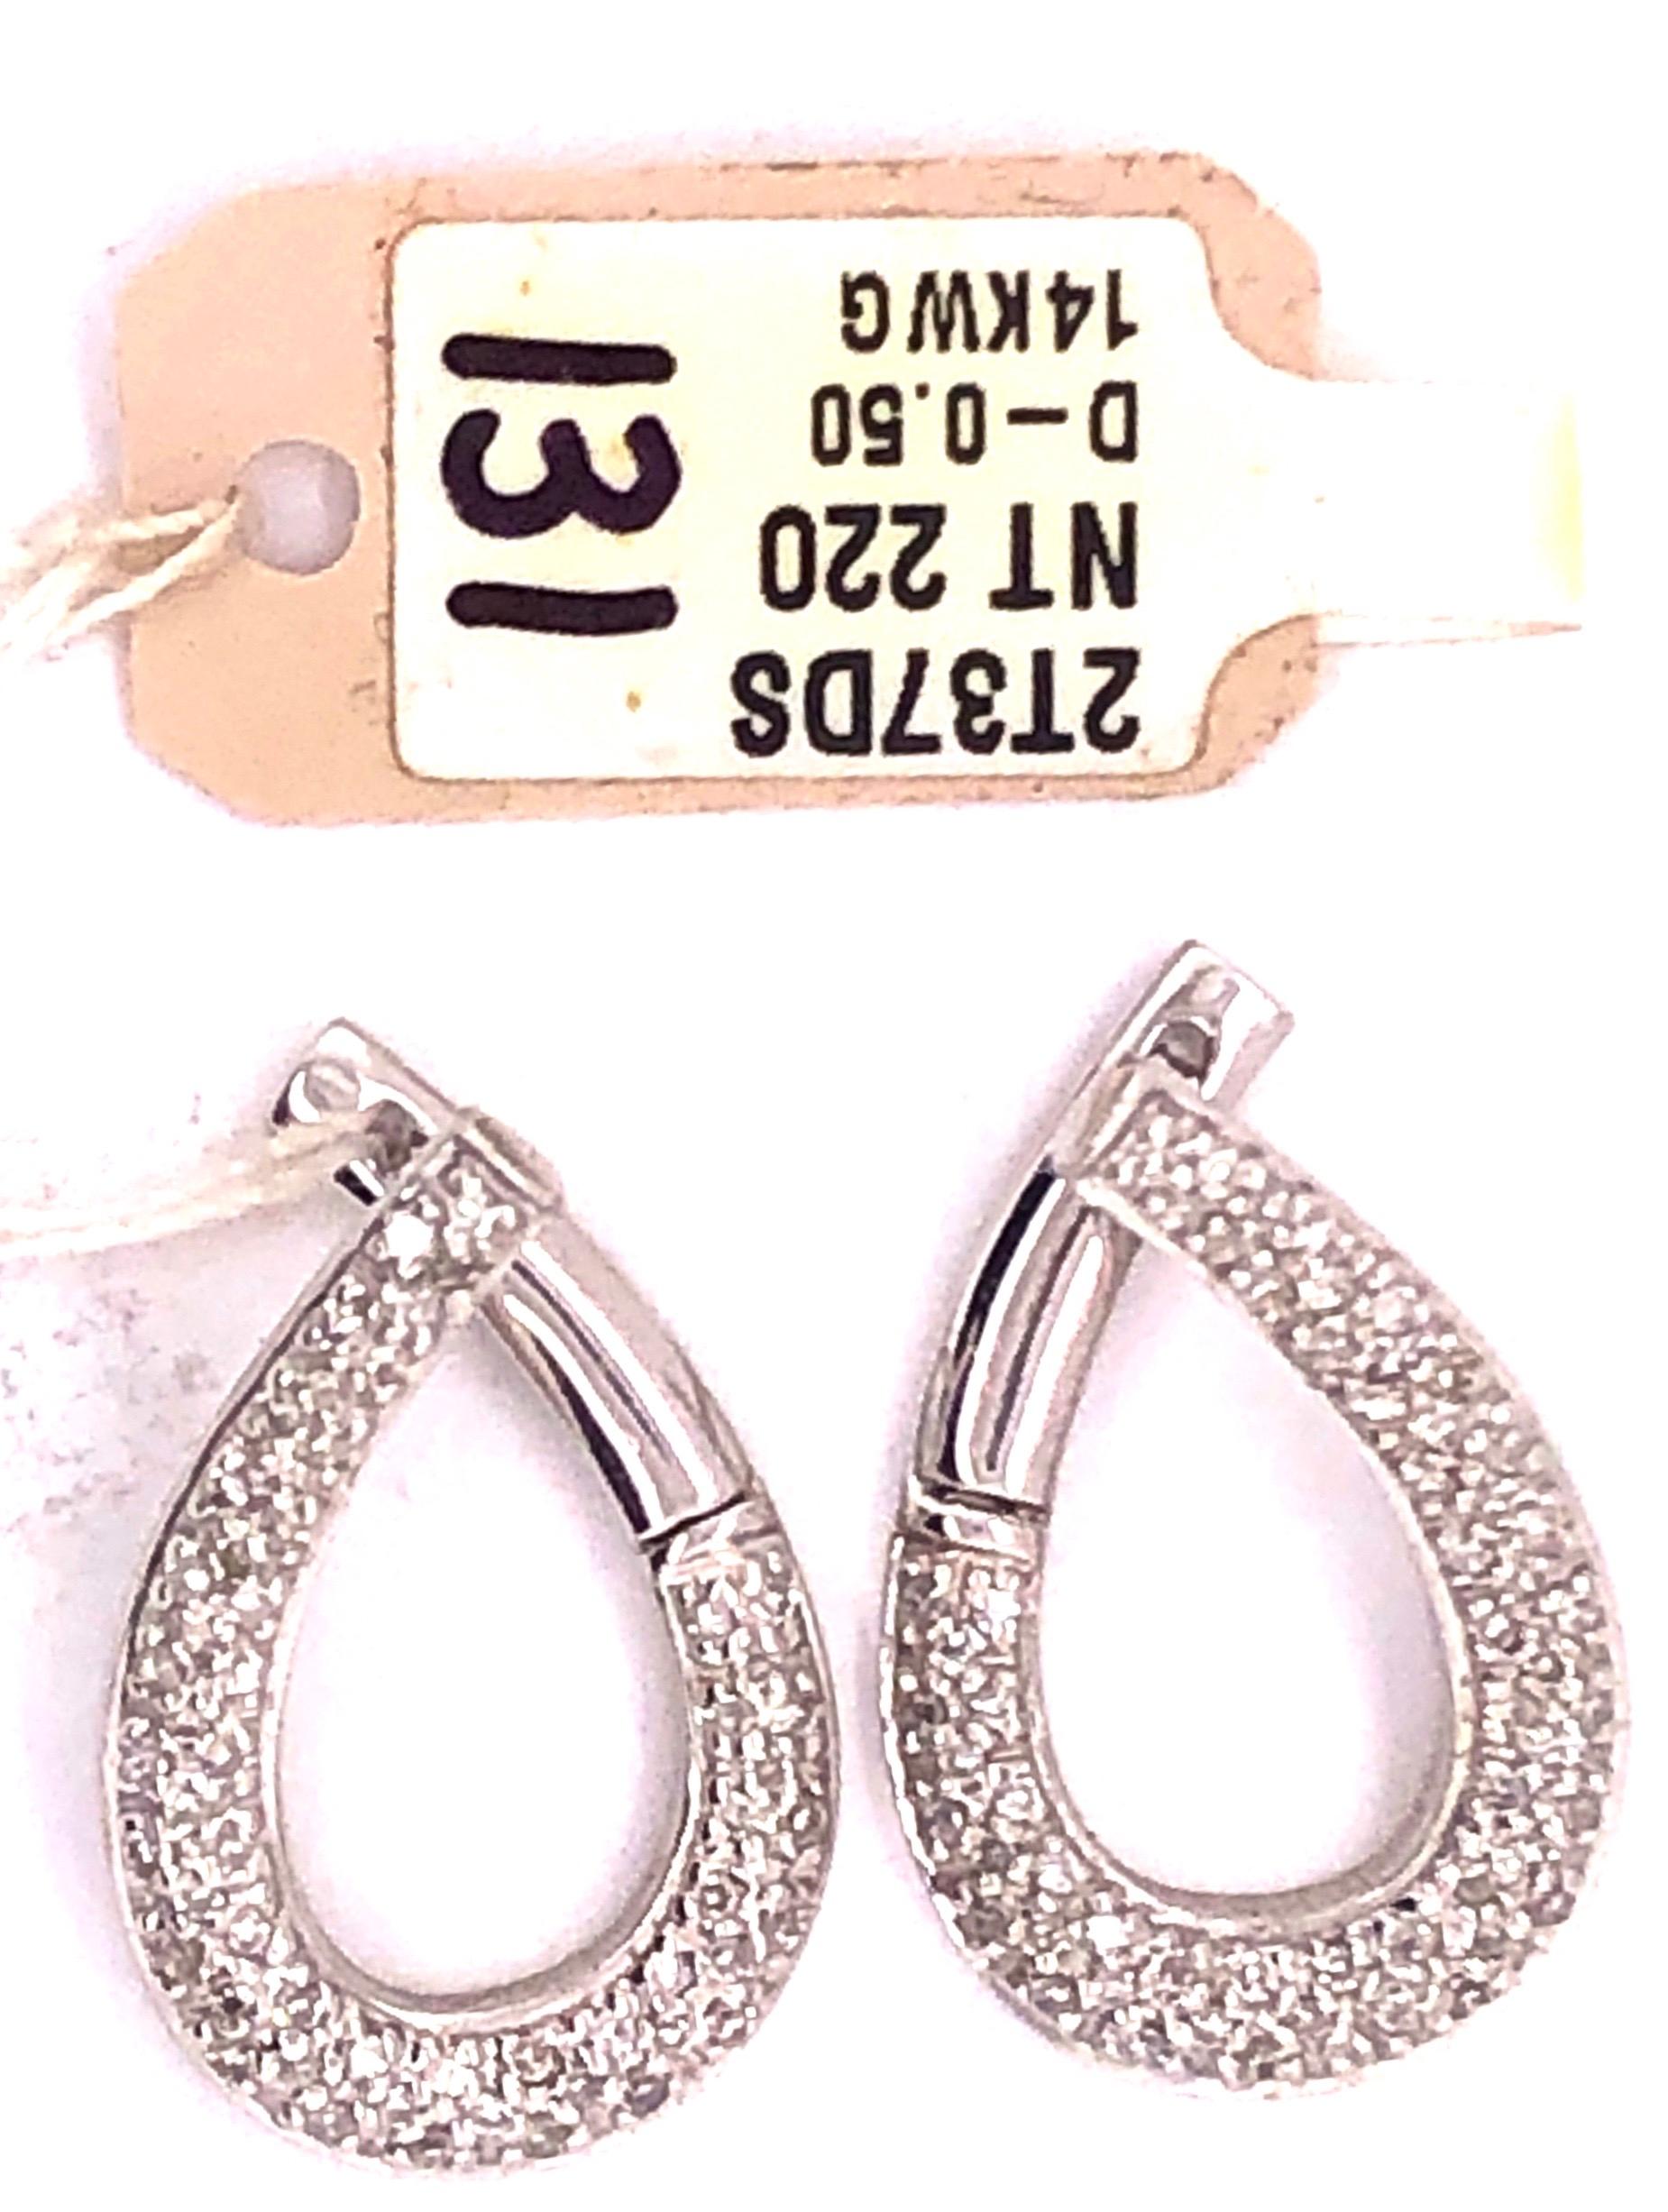 14Kt White Gold Latch Back Earrings with .50 Total Diamond Weight. Total Gold Weight 5.6 Grams.

